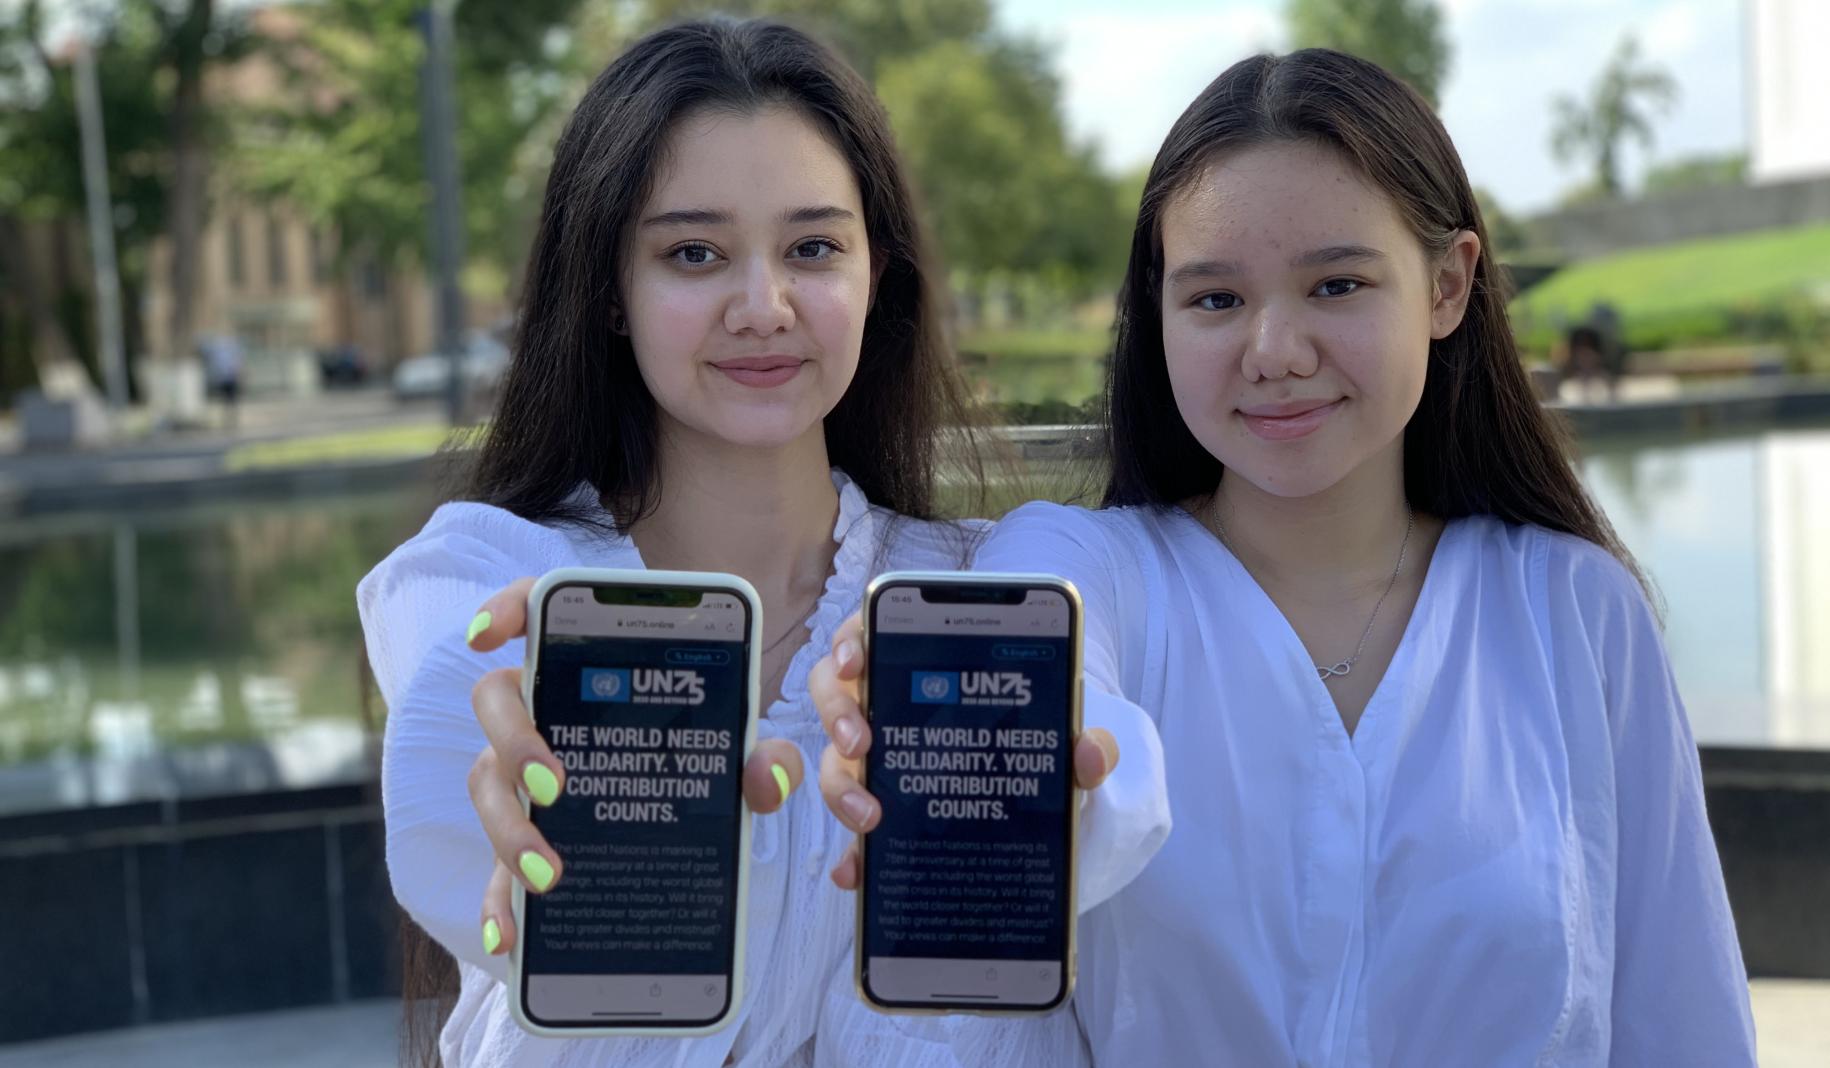 Two adolescent girls hold up their mobile phones directly towards the camera as they show the UN75 survey on the screen.